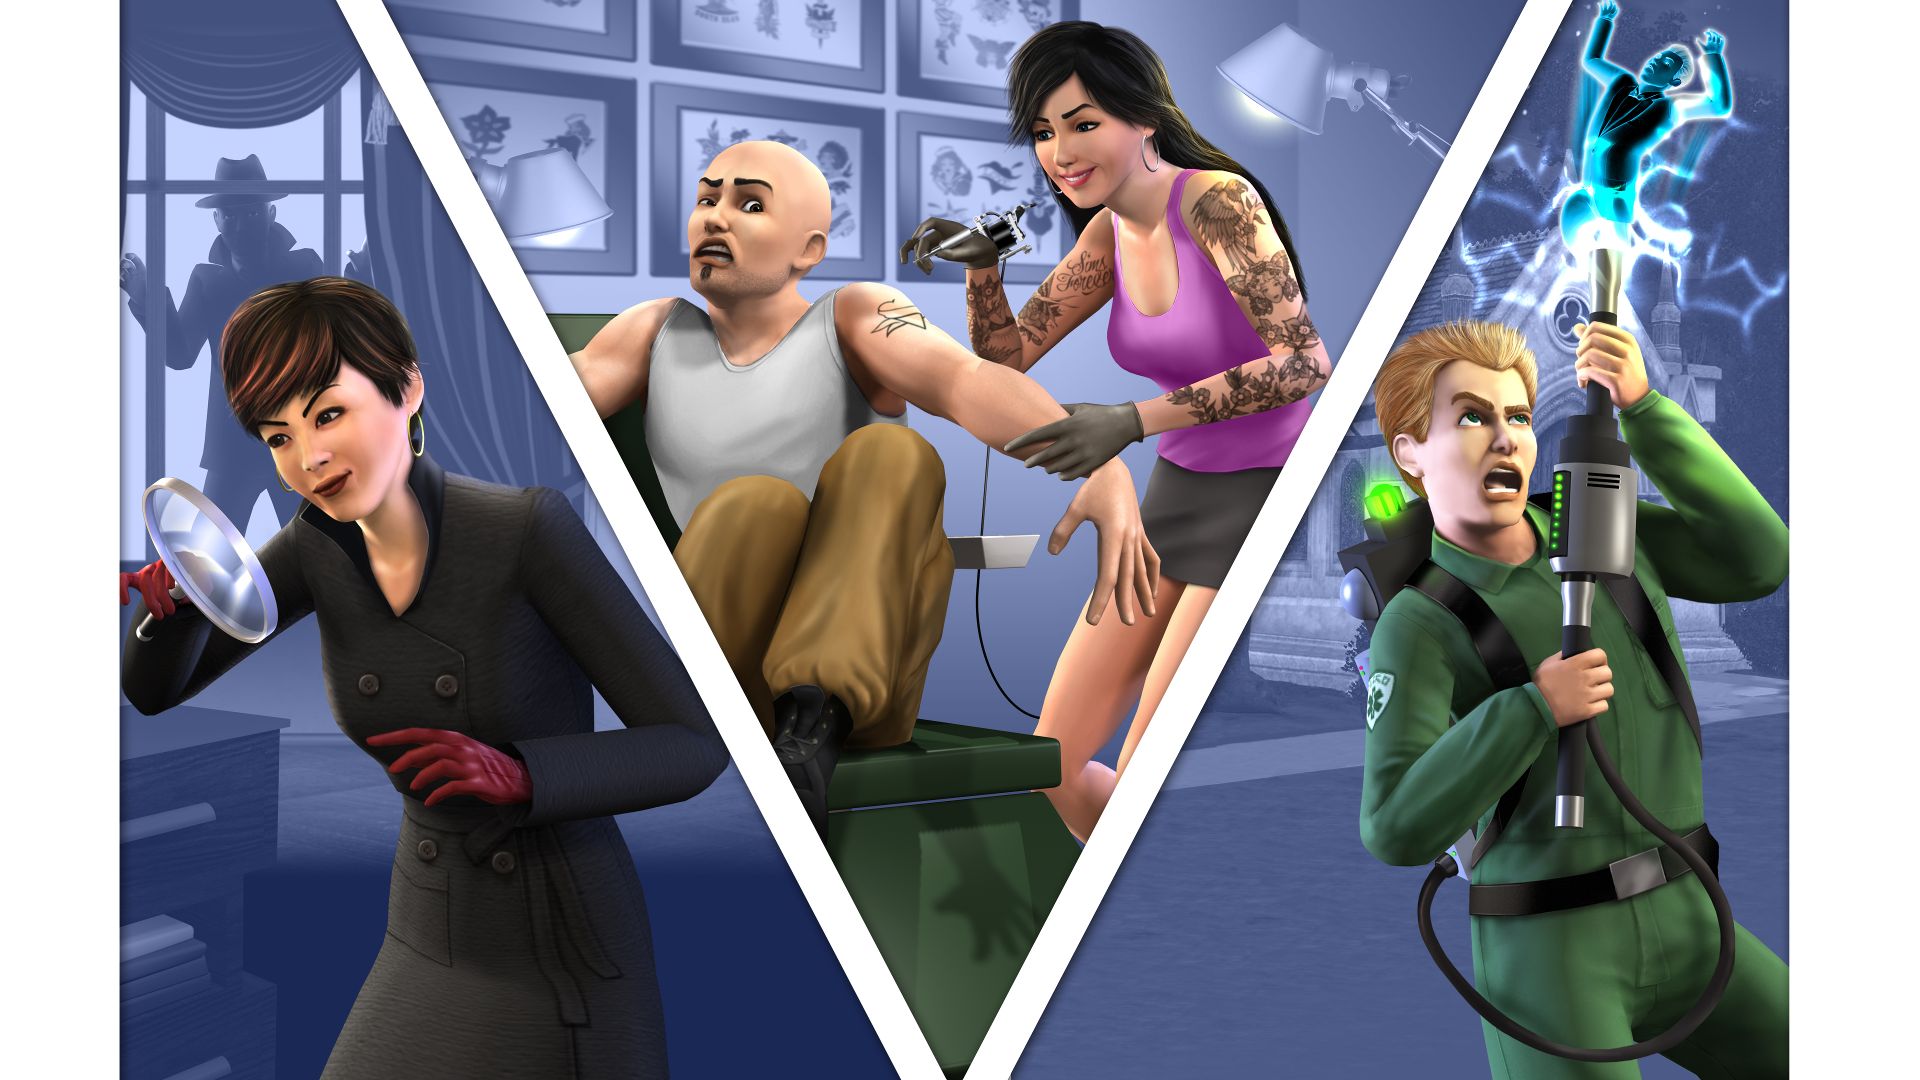 sims 3 ambitions free full version